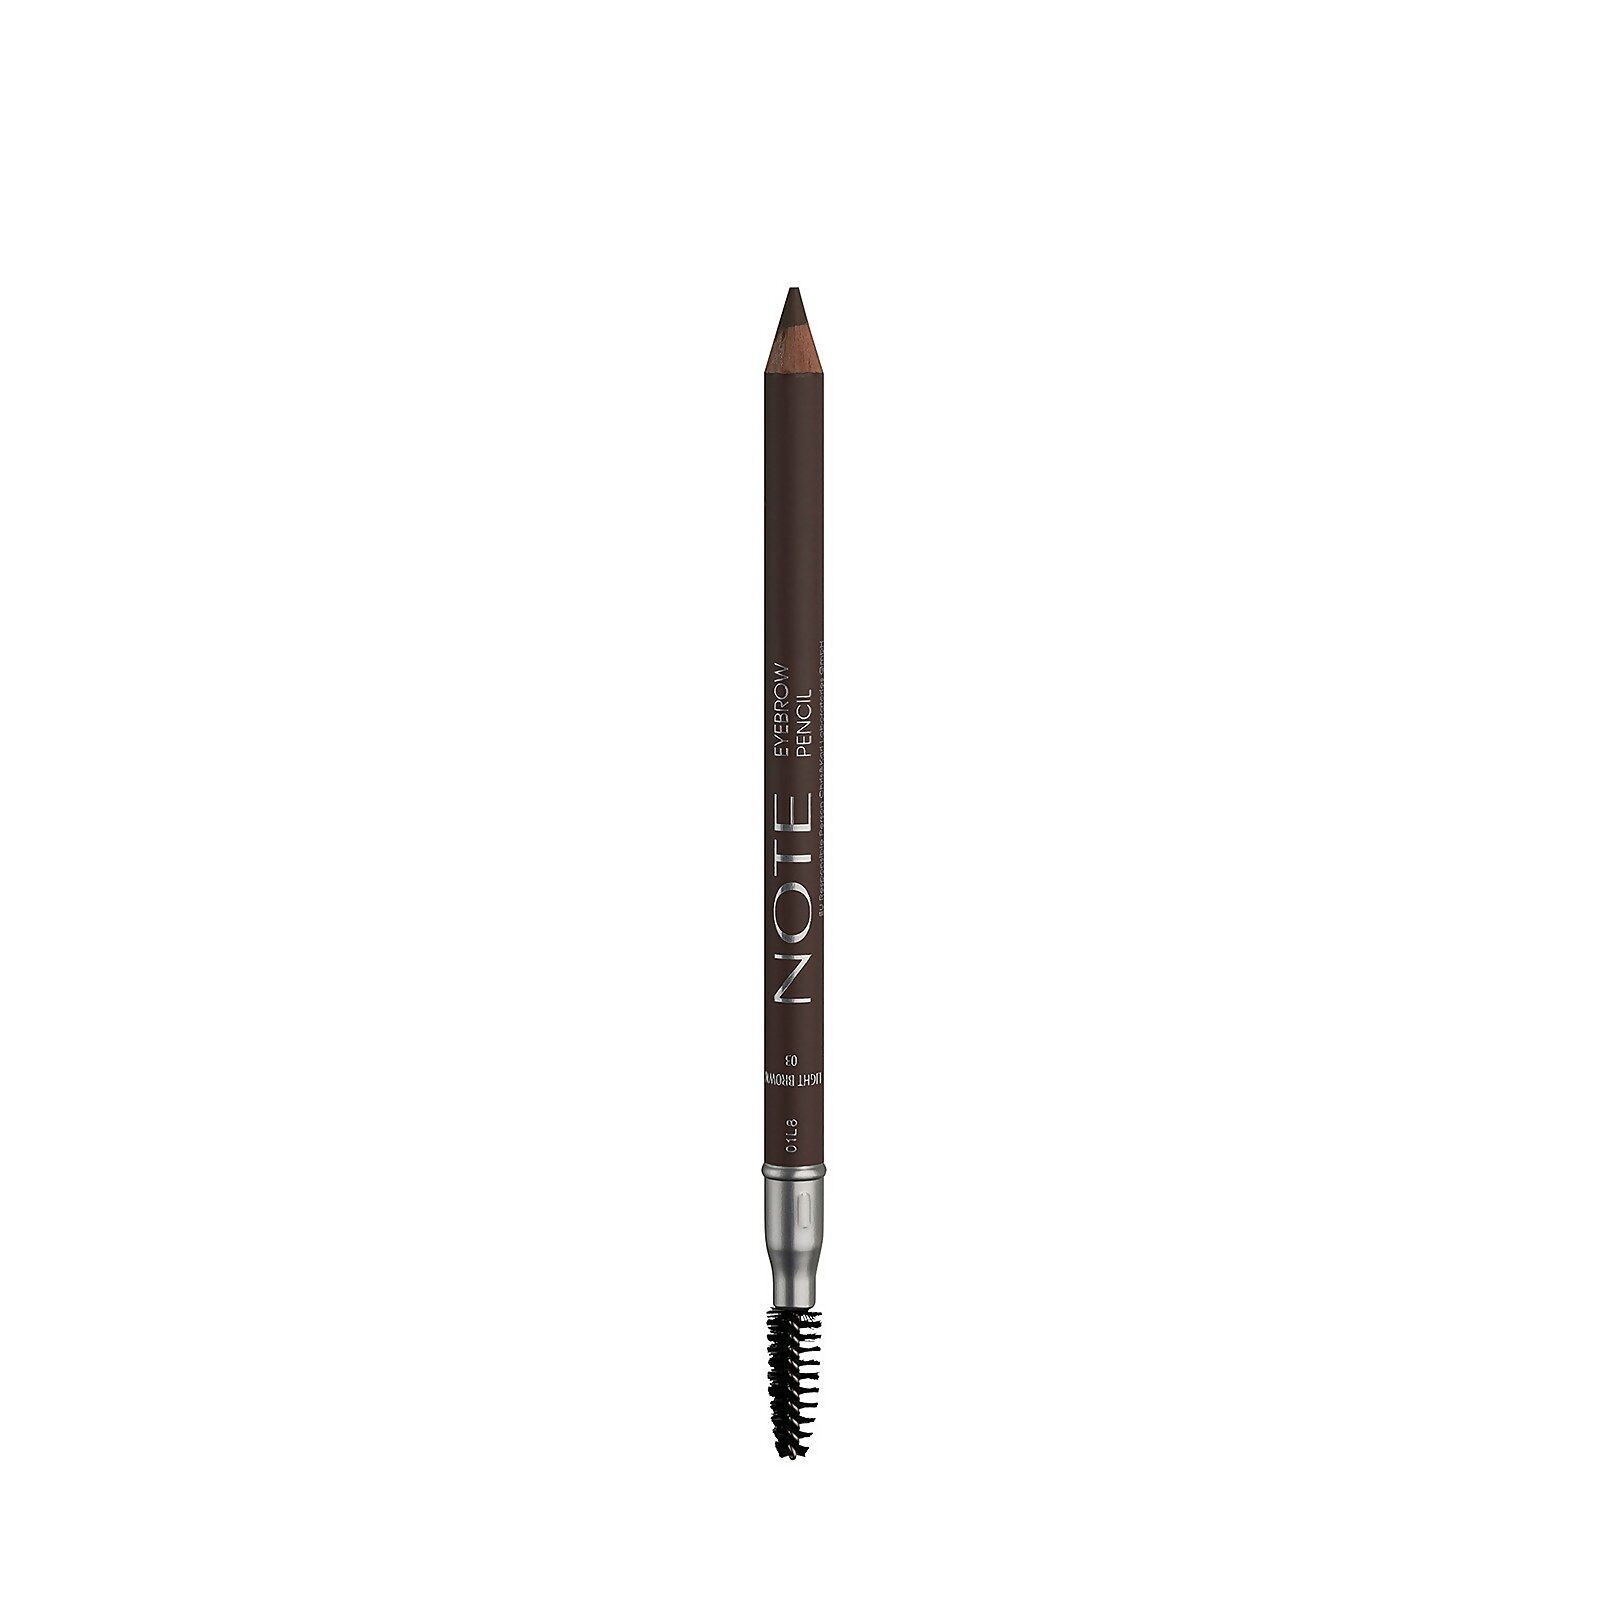 Note Cosmetics Eyebrow Pencil 1.1g (Various Shades) - 03 Light Brown